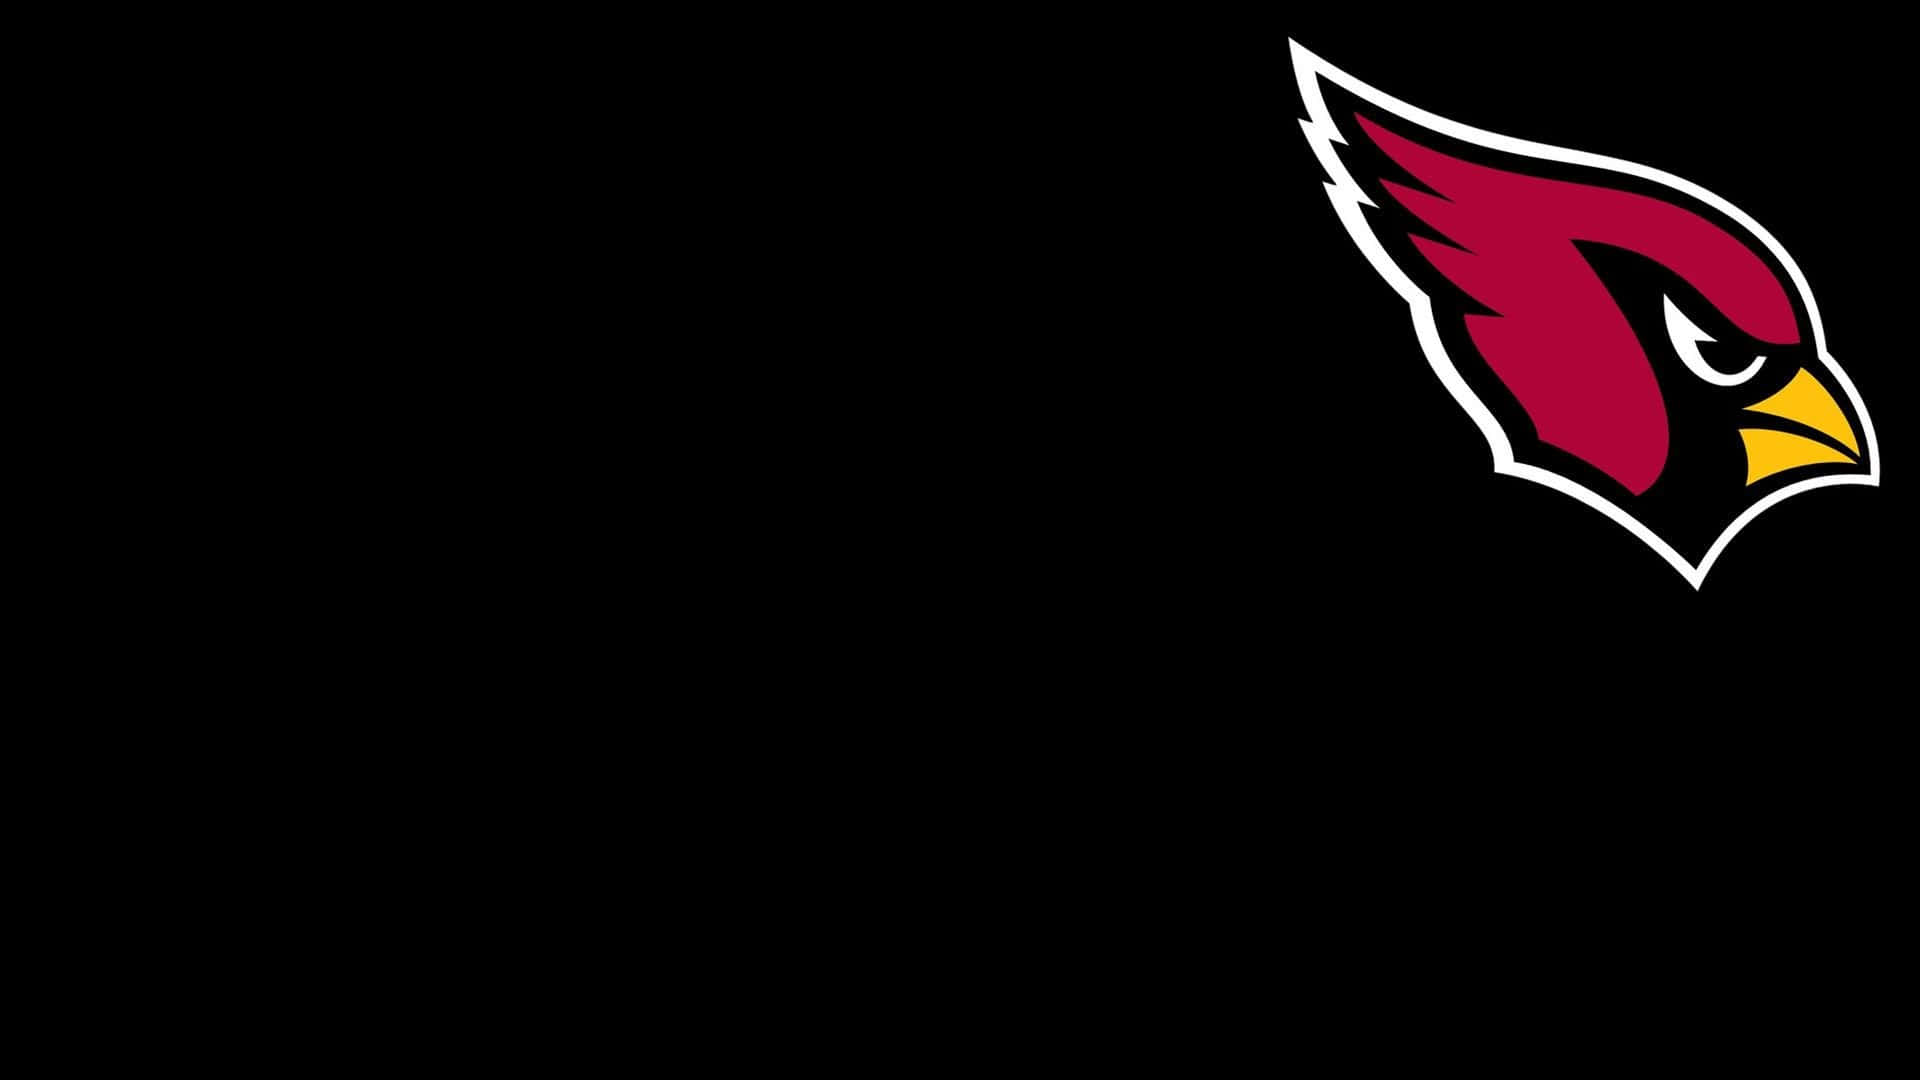 Show Your Support for the Arizona Cardinals